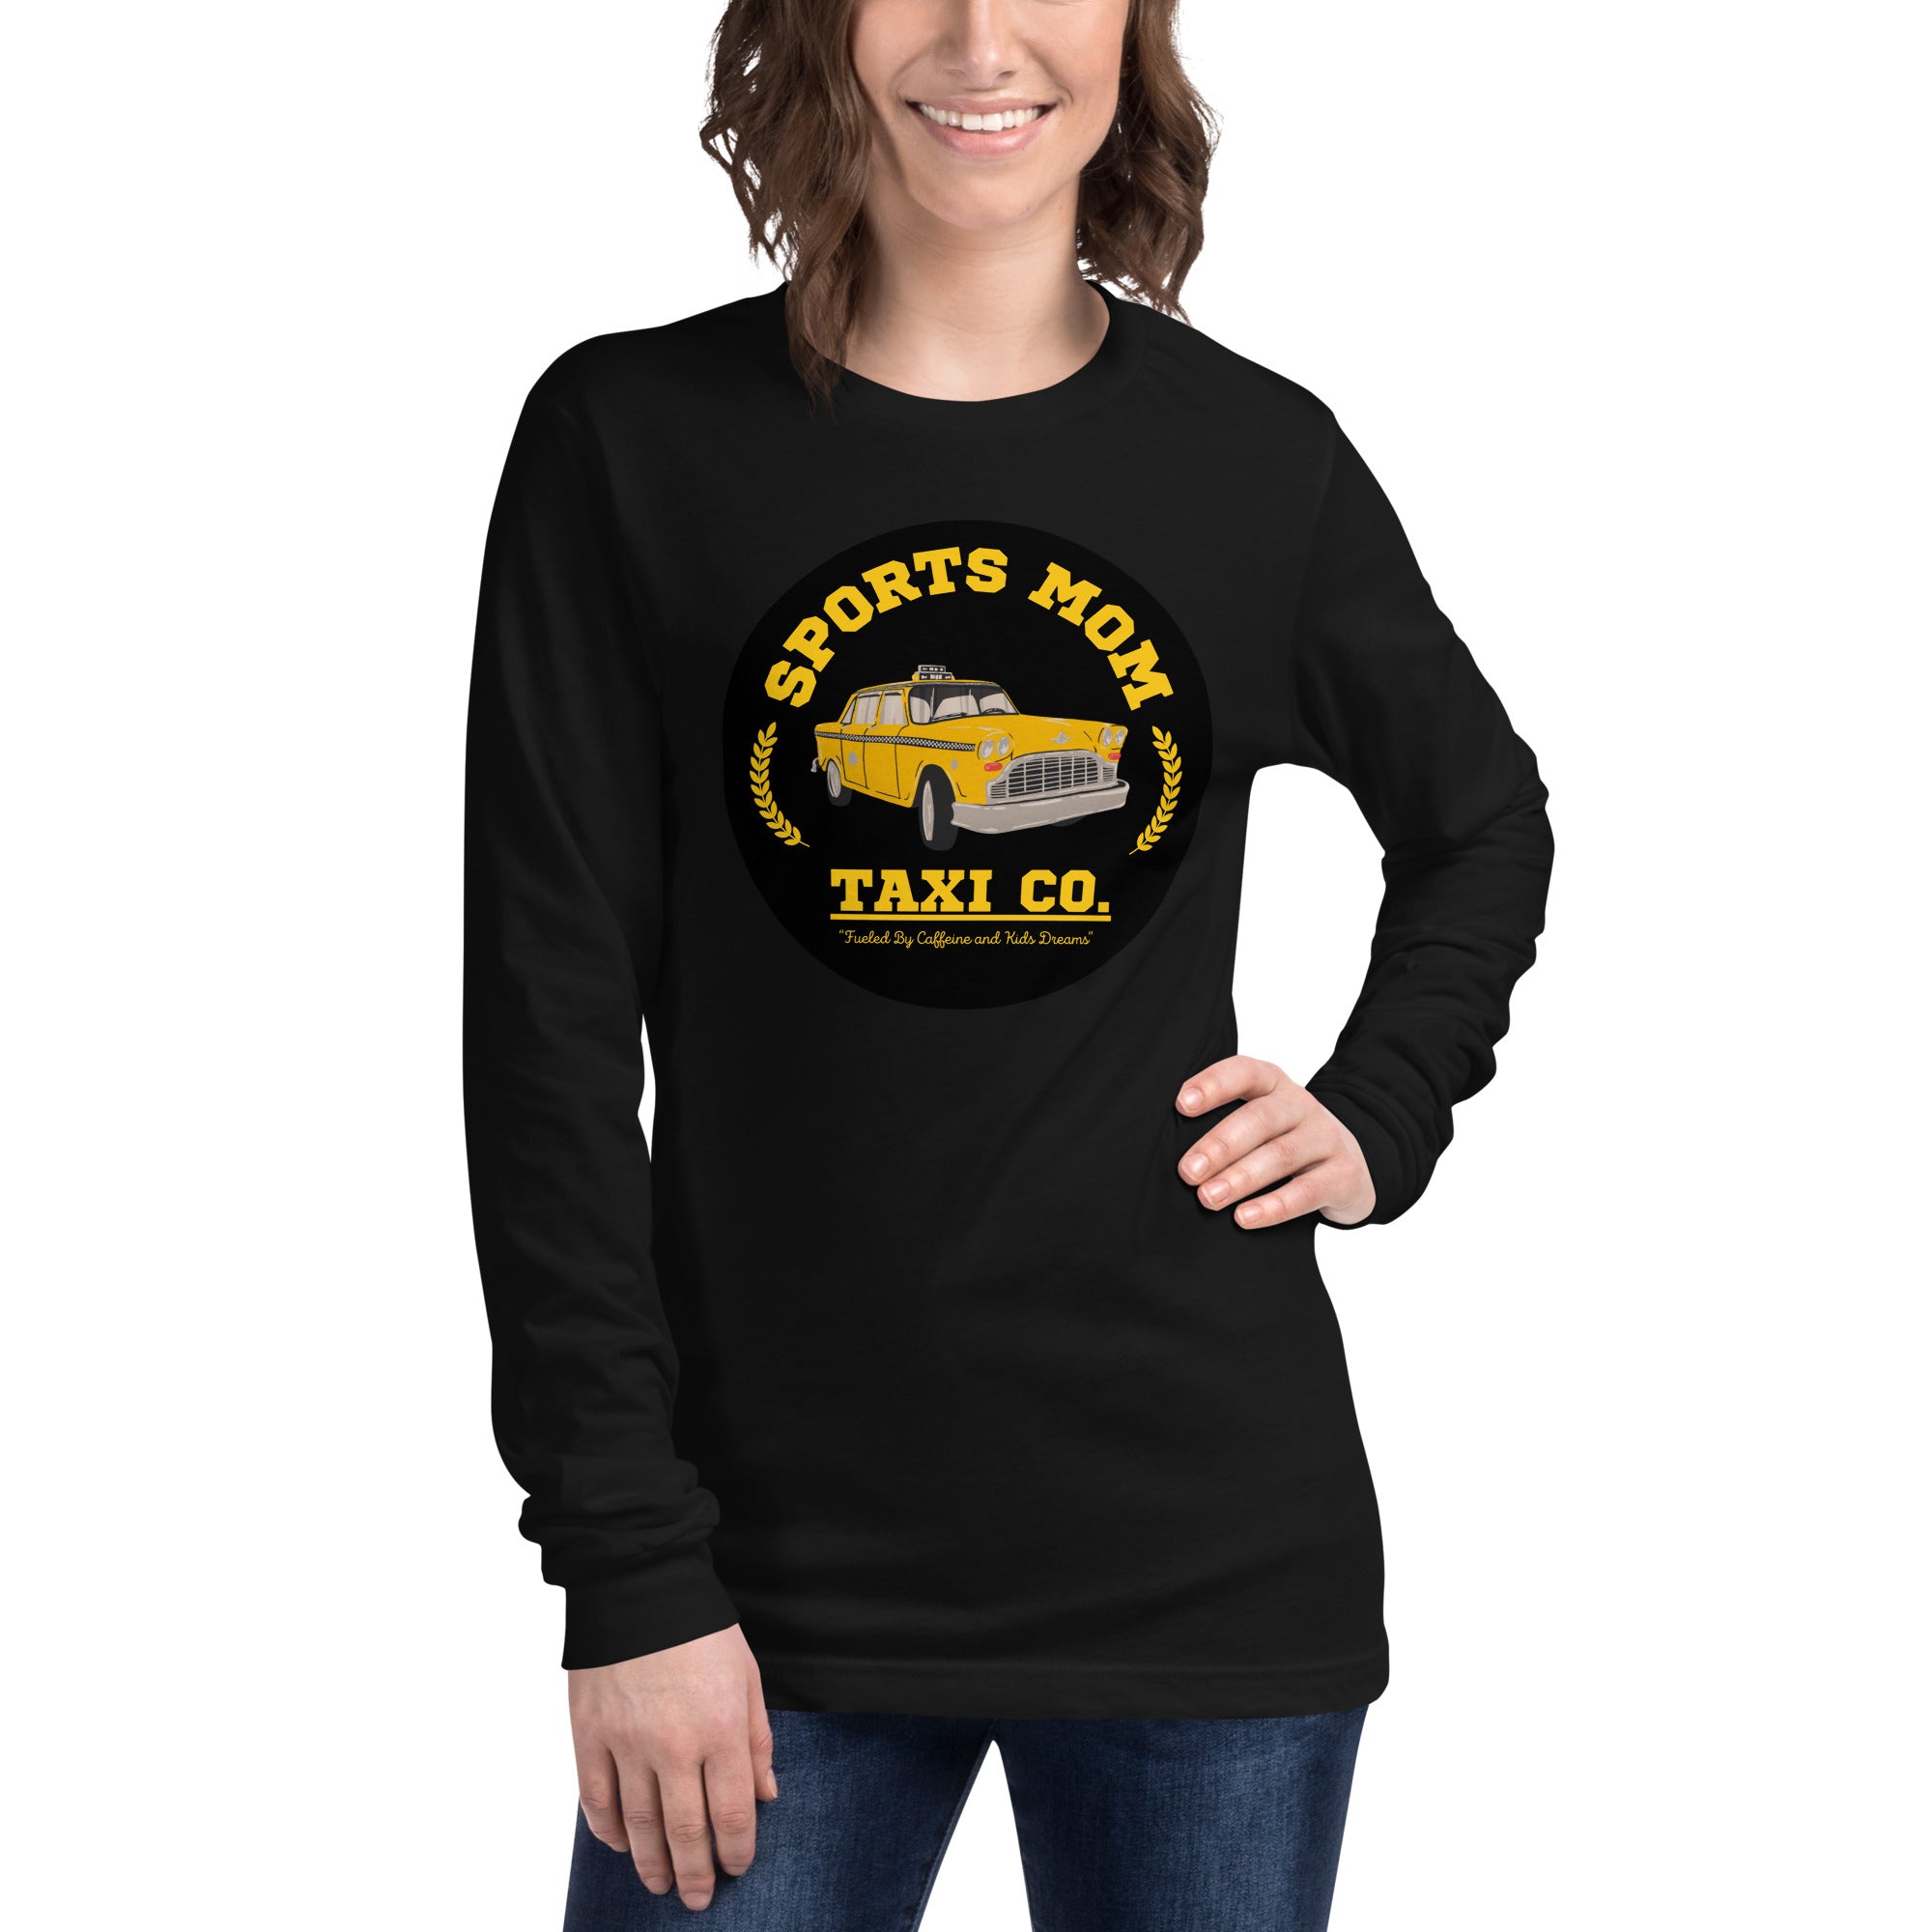 The Sports Mom Taxi Co. Original Long Sleeve